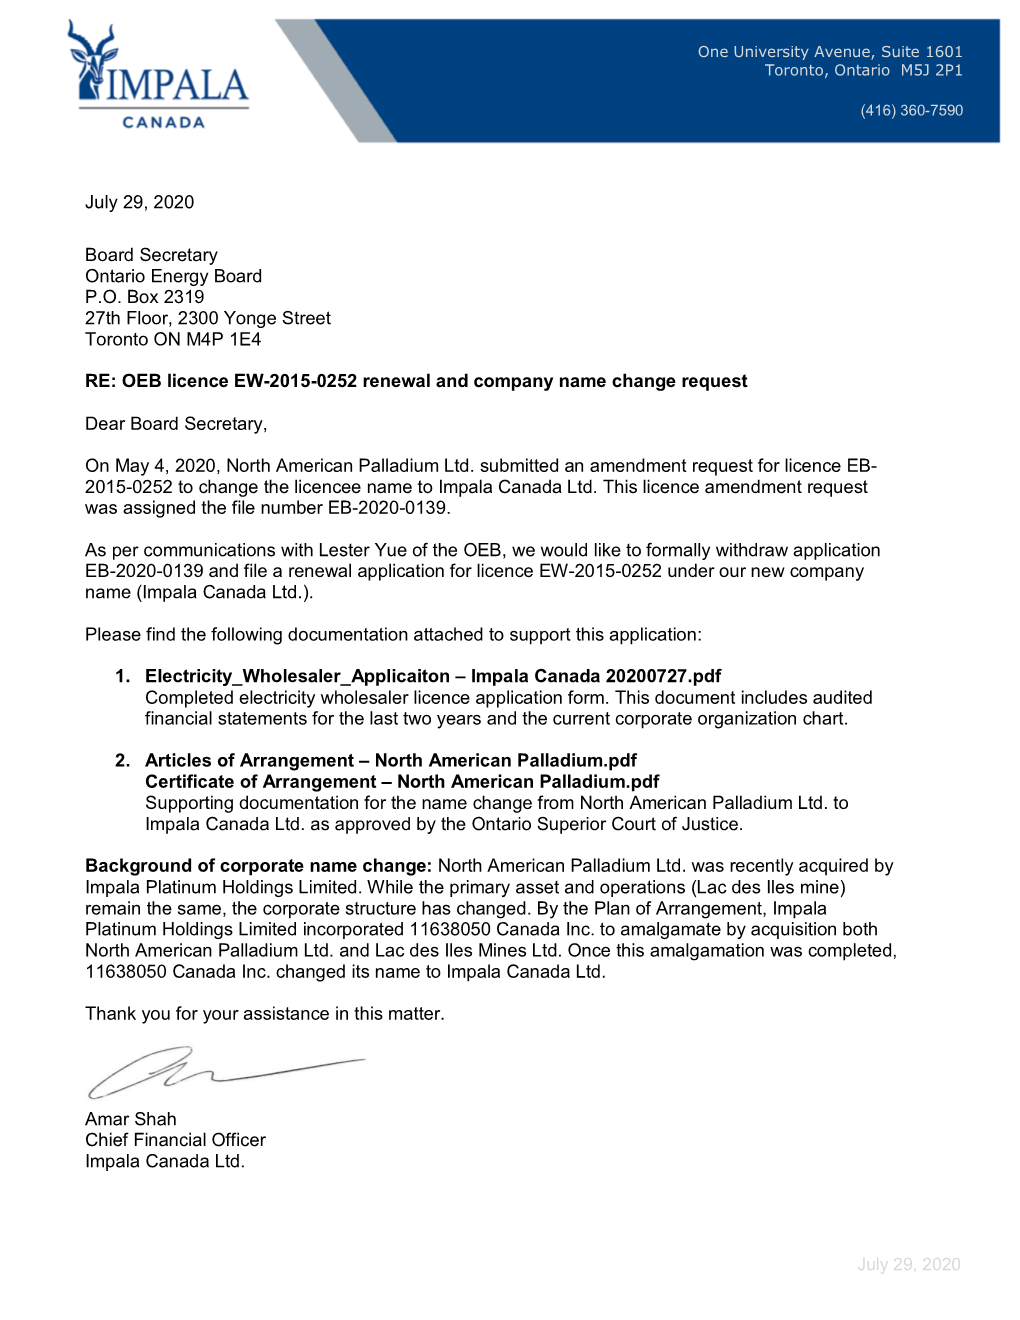 OEB Licence EW-2015-0252 Renewal and Company Name Change Request